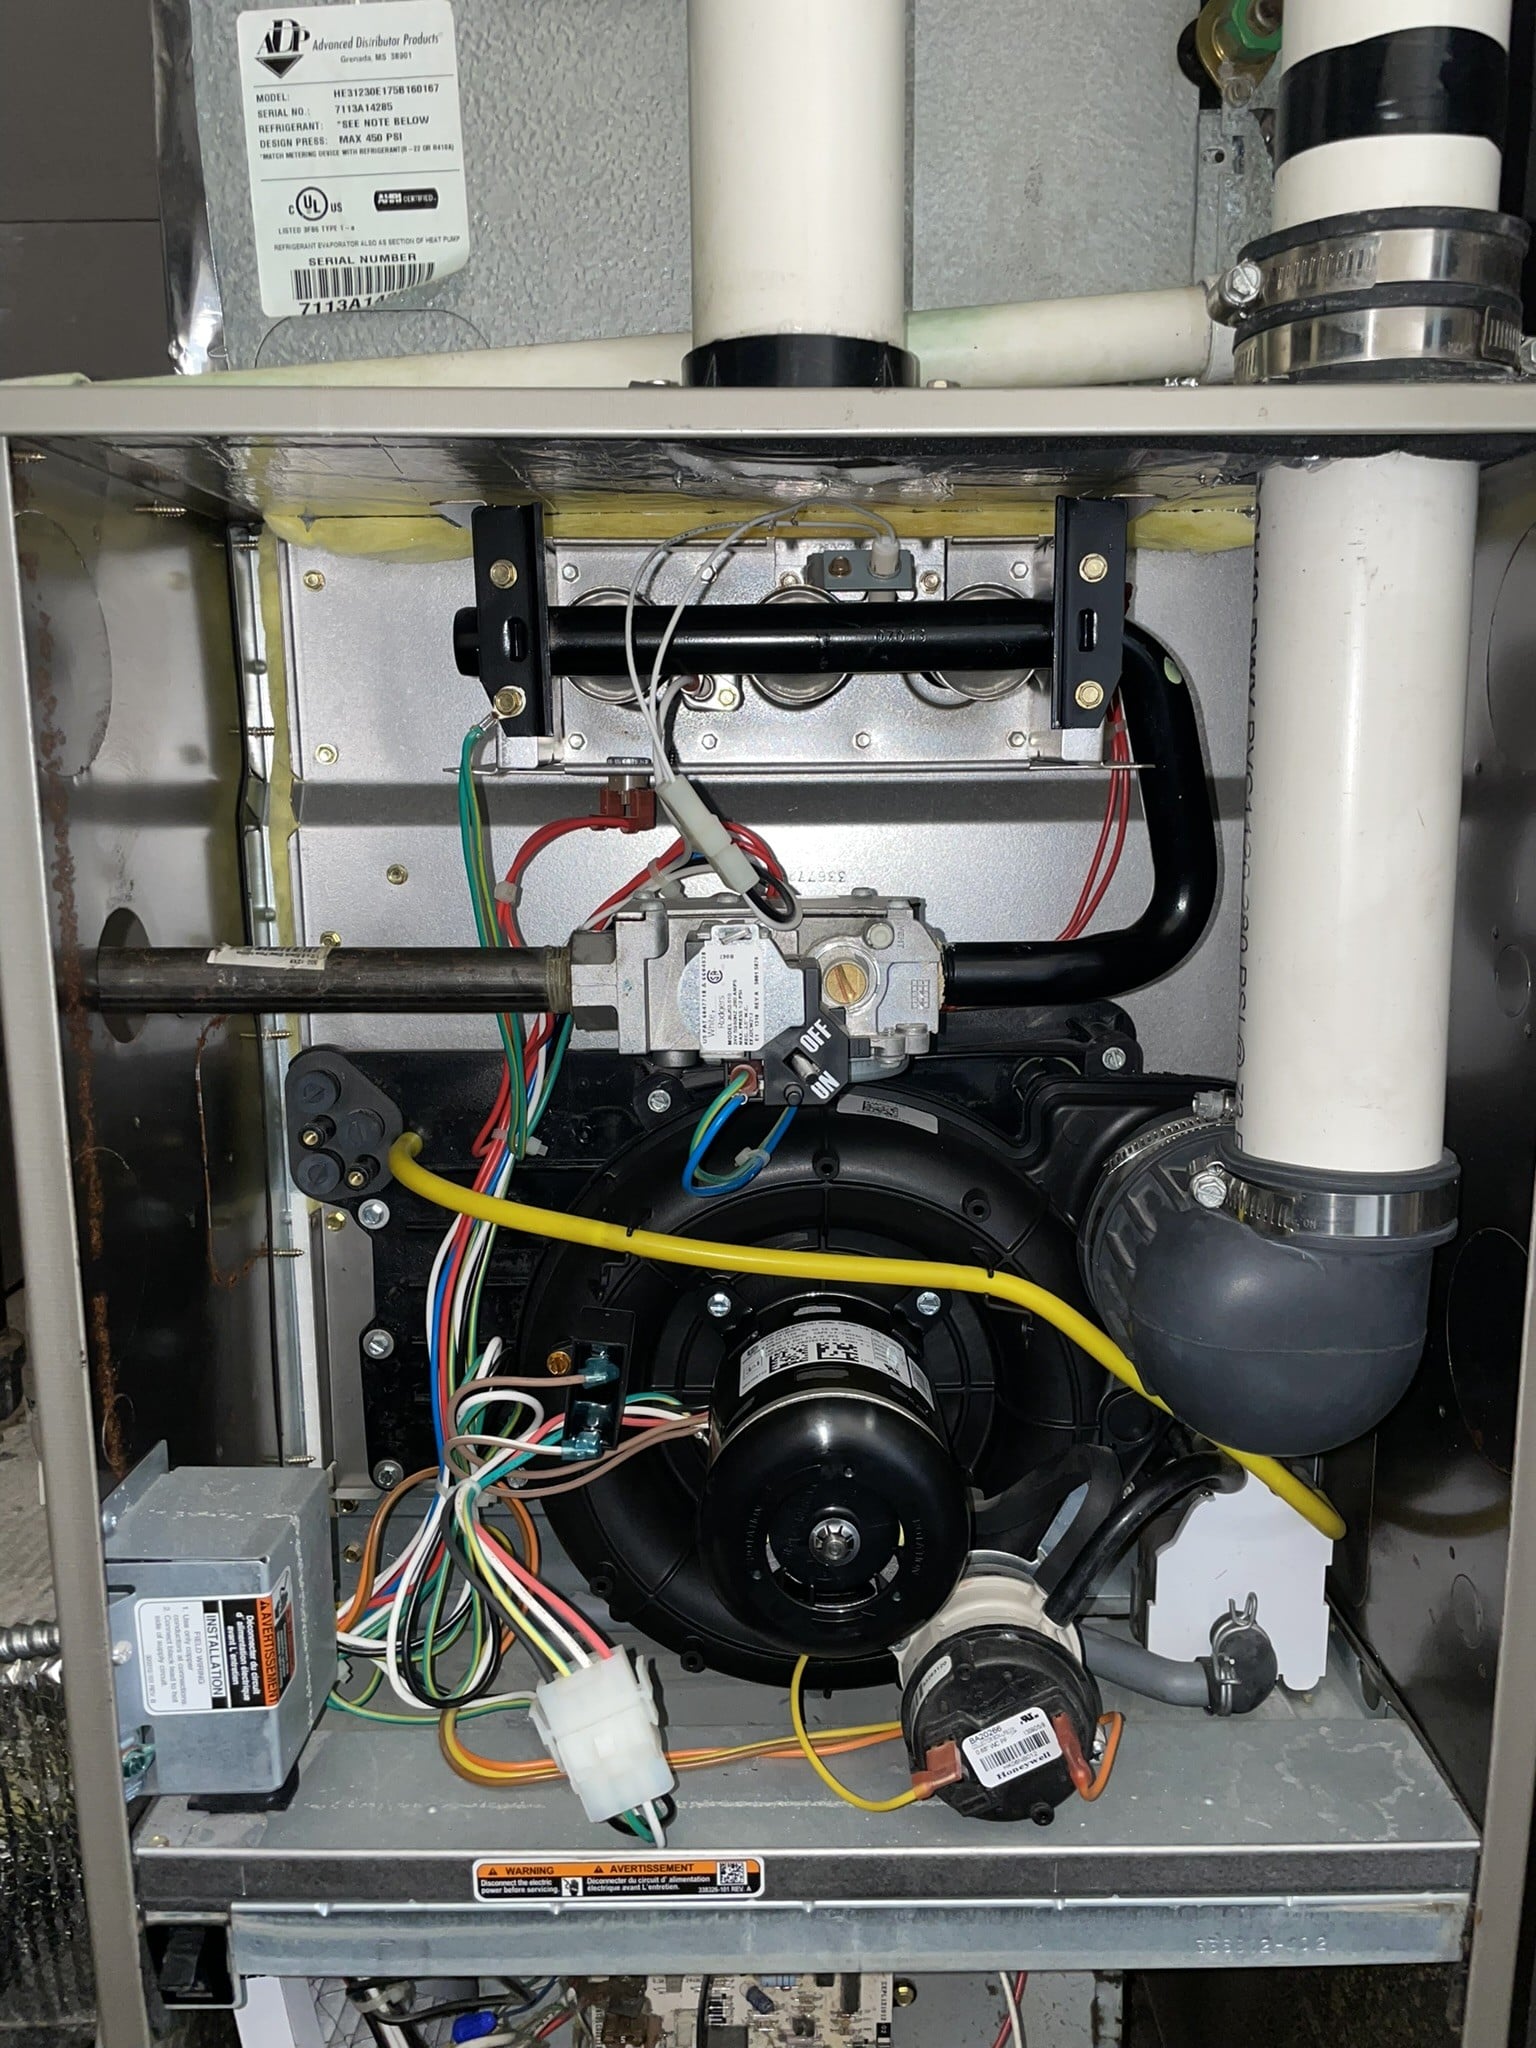 Inspection of a Natural Gas Furnace